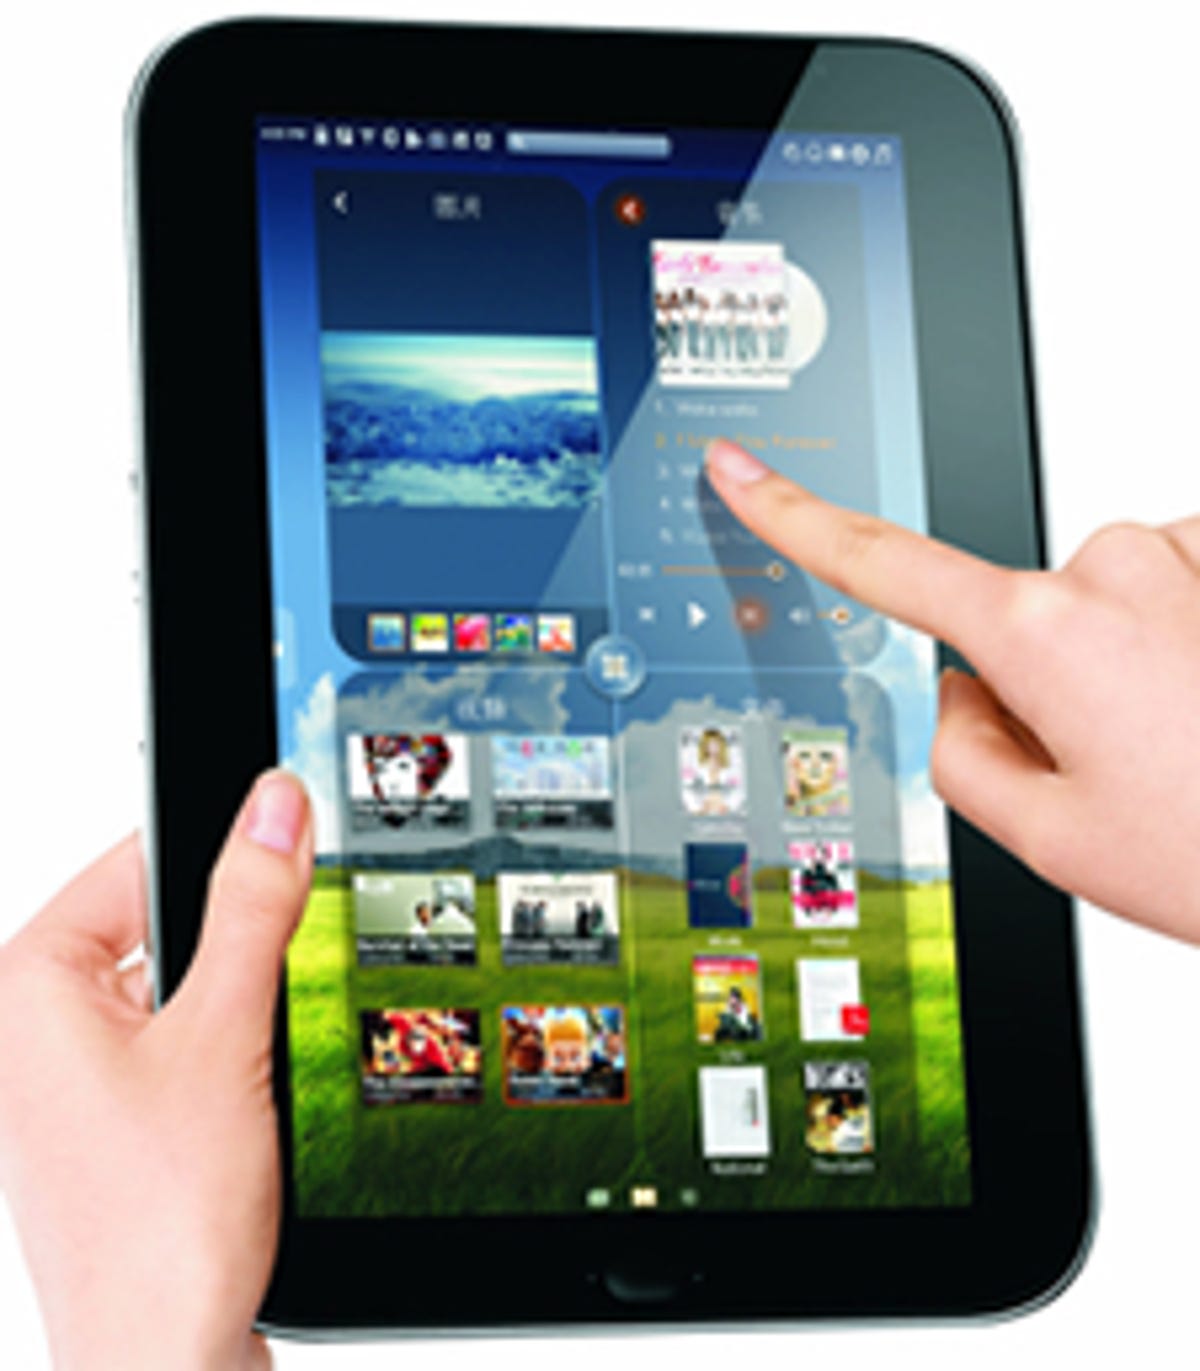 Lenovo plans several new tablets as follow-ups to its current LePad.